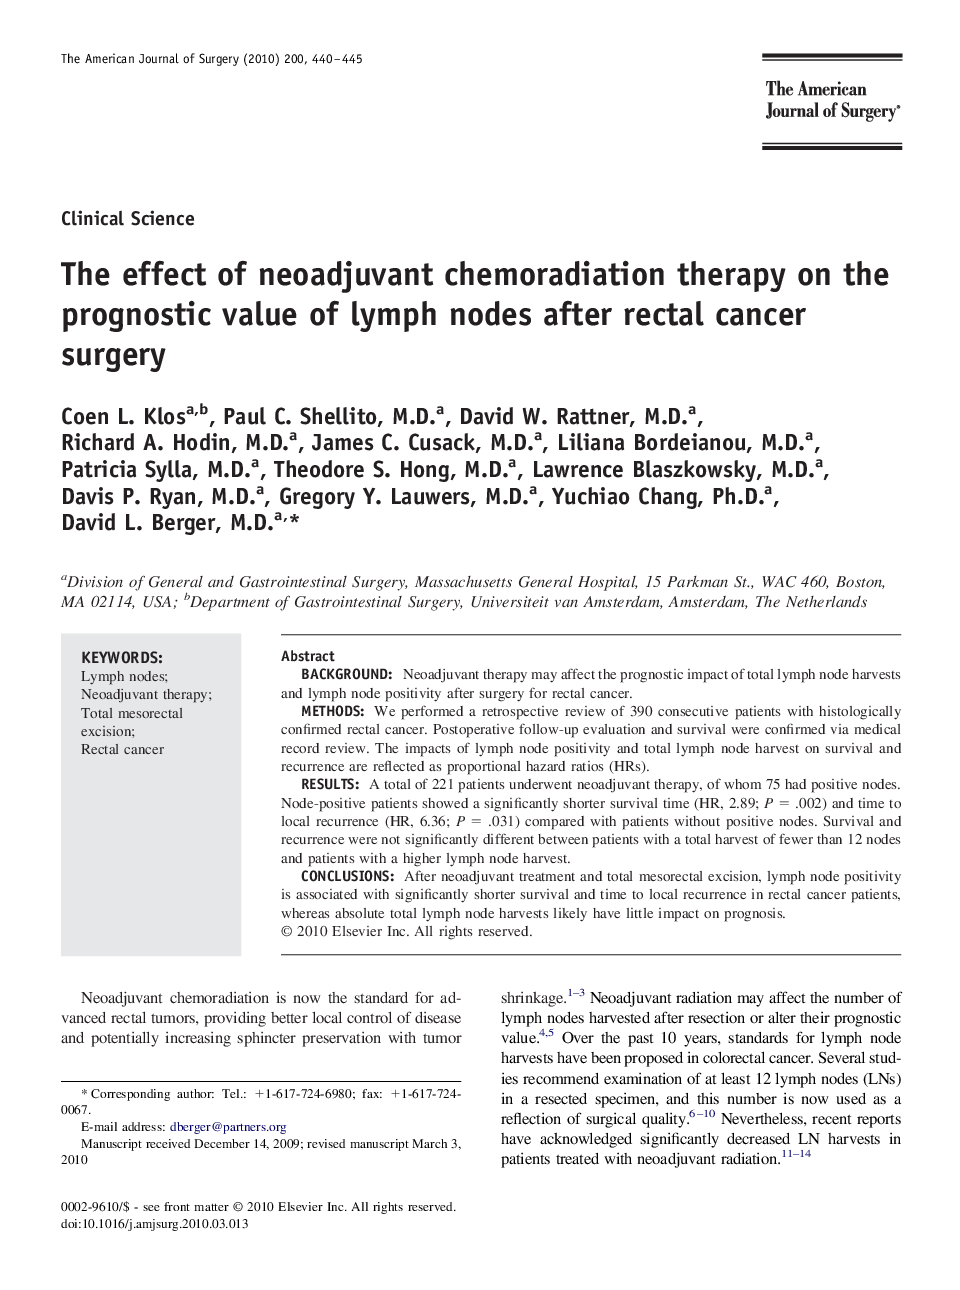 The effect of neoadjuvant chemoradiation therapy on the prognostic value of lymph nodes after rectal cancer surgery